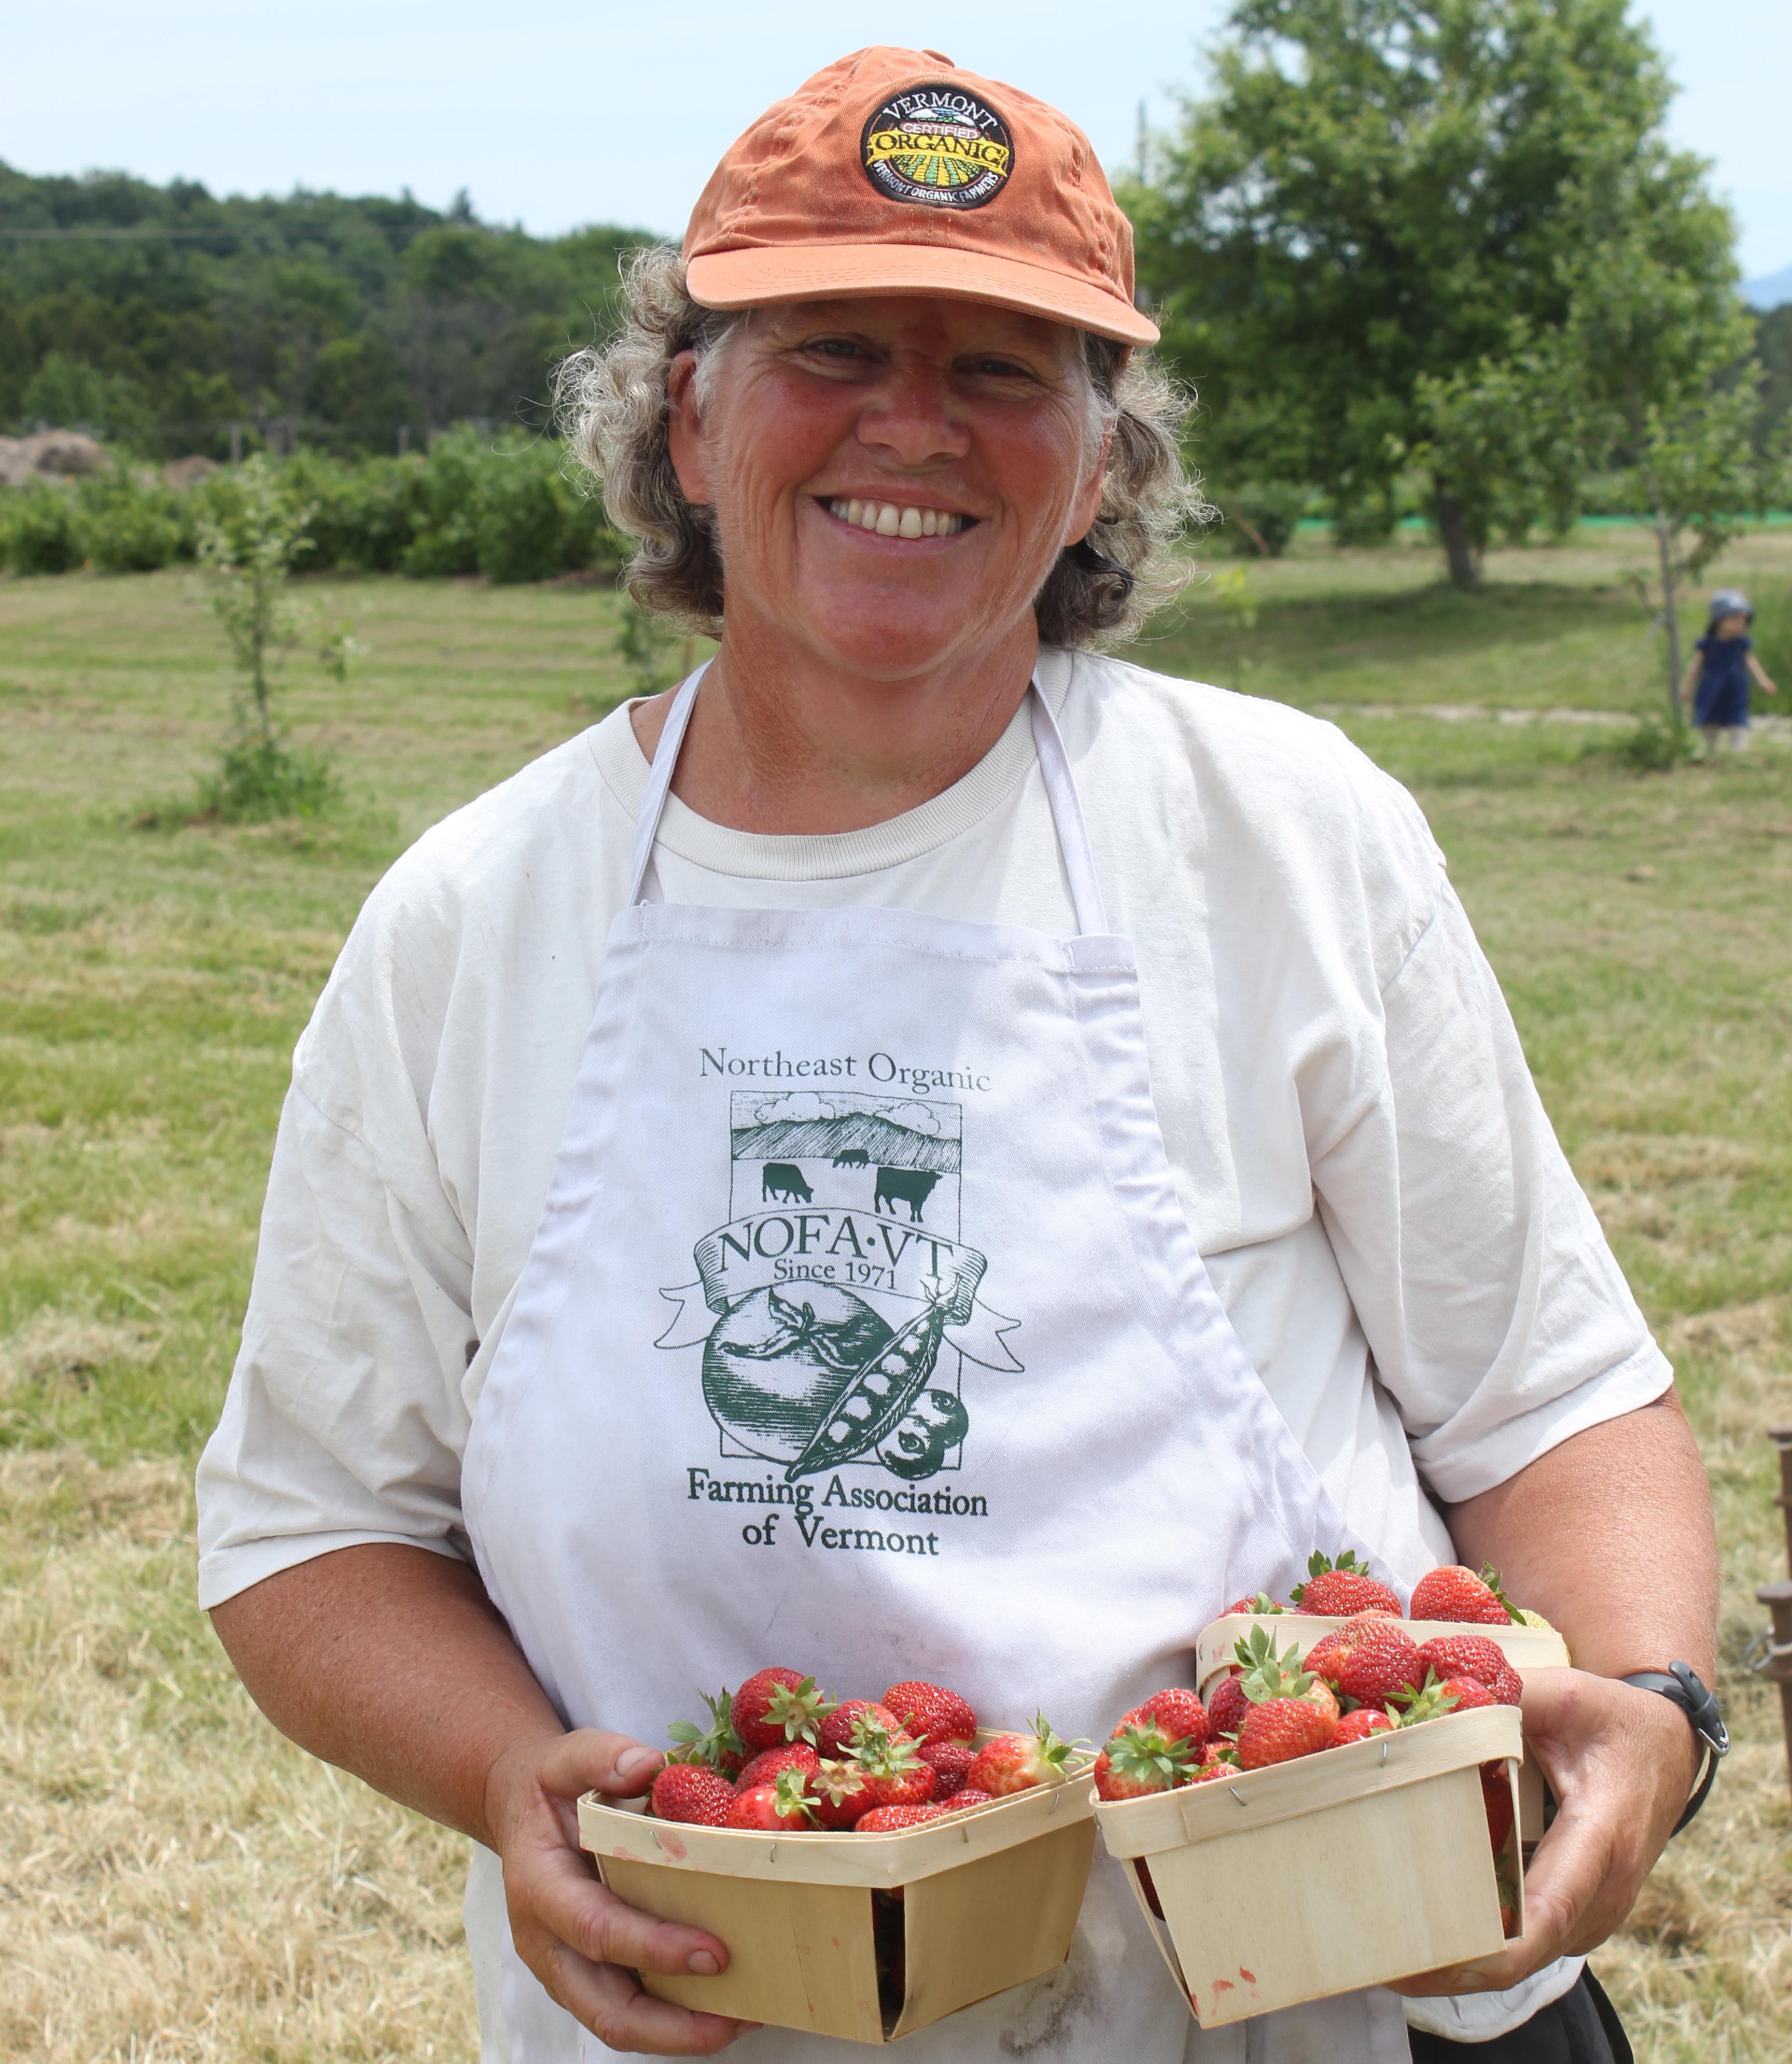 Enid stands wearing a VOF hat and a NOFA-VT apron, holding a carton of strawberries and smiling.